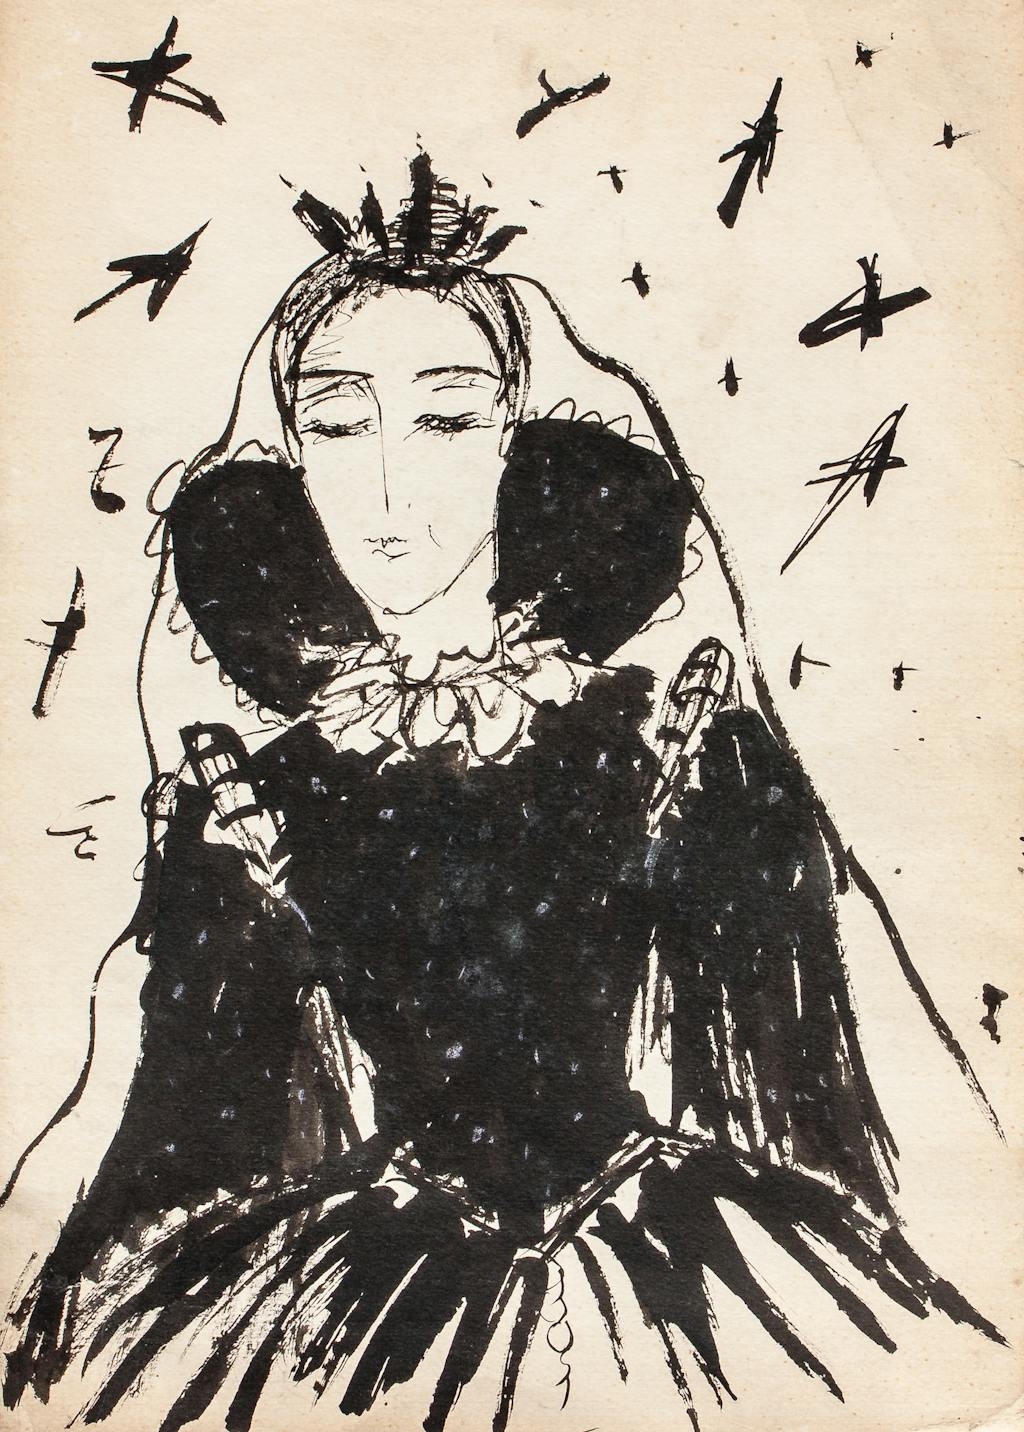 Painting "Queen of the night", painted by Elena Birkenwald in 1983